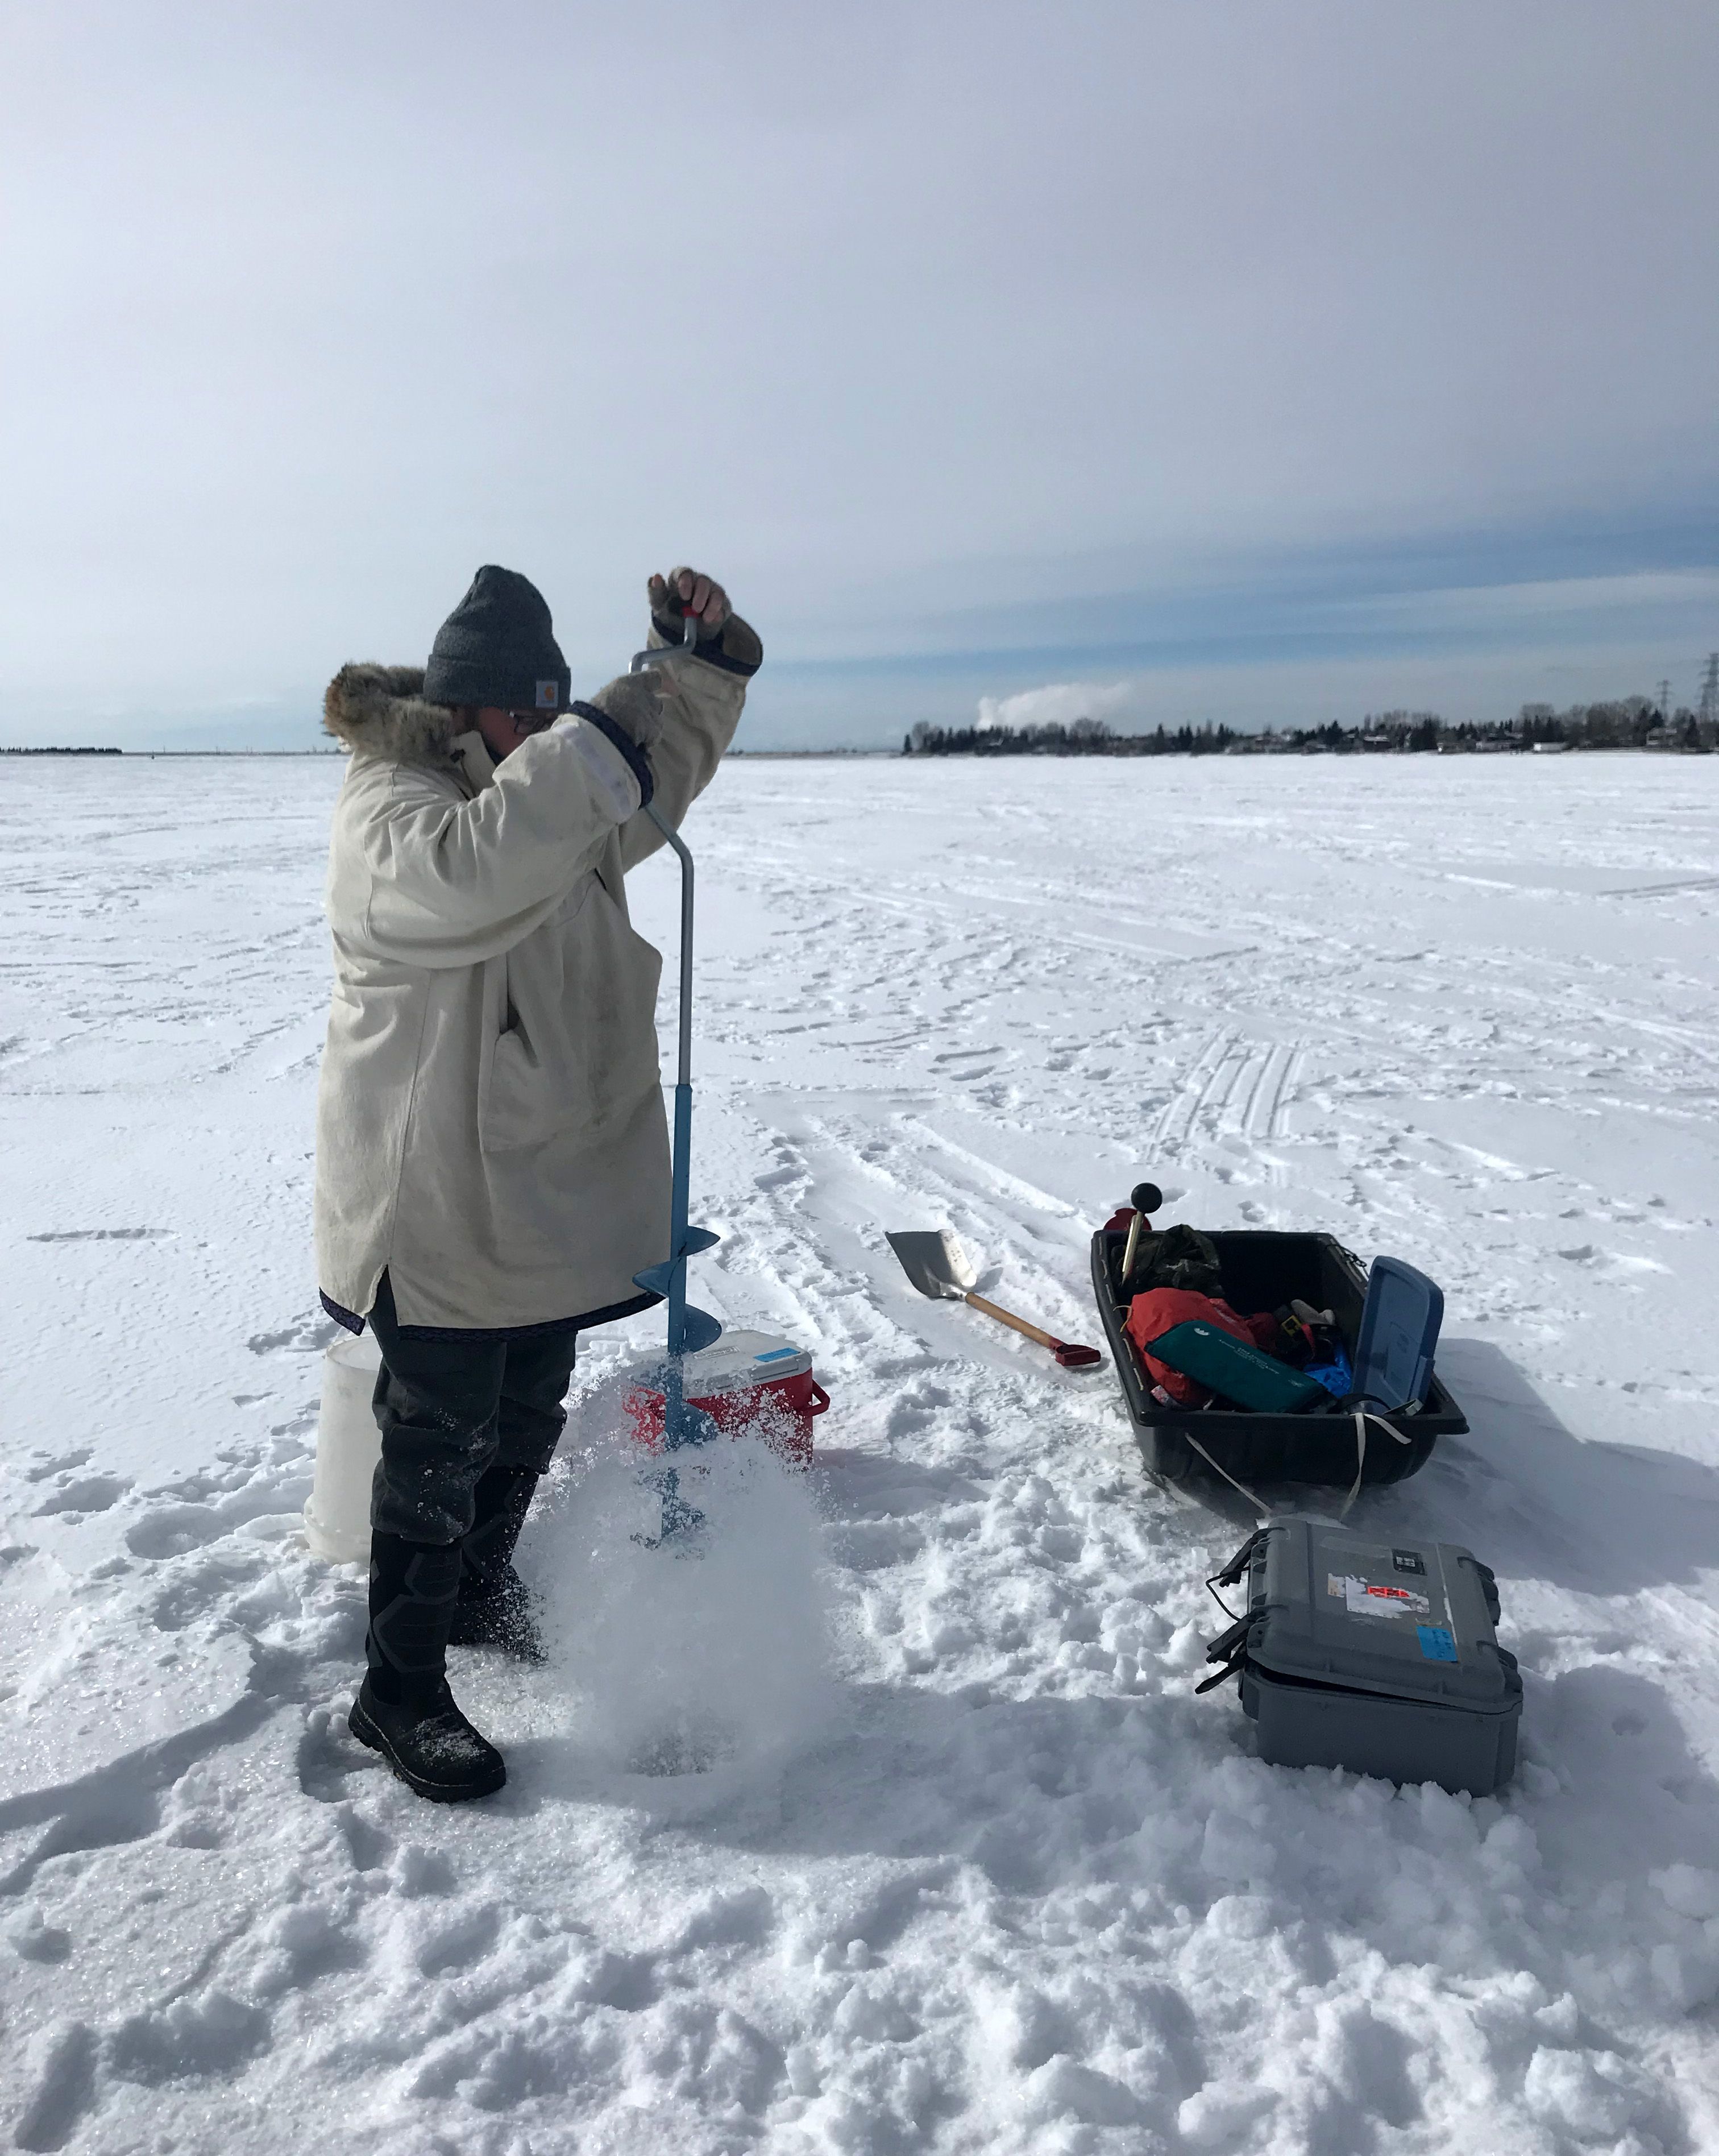 LakeKeepers volunteer Rick Robinson using an auger to drill a hole in Chestermere Lake.